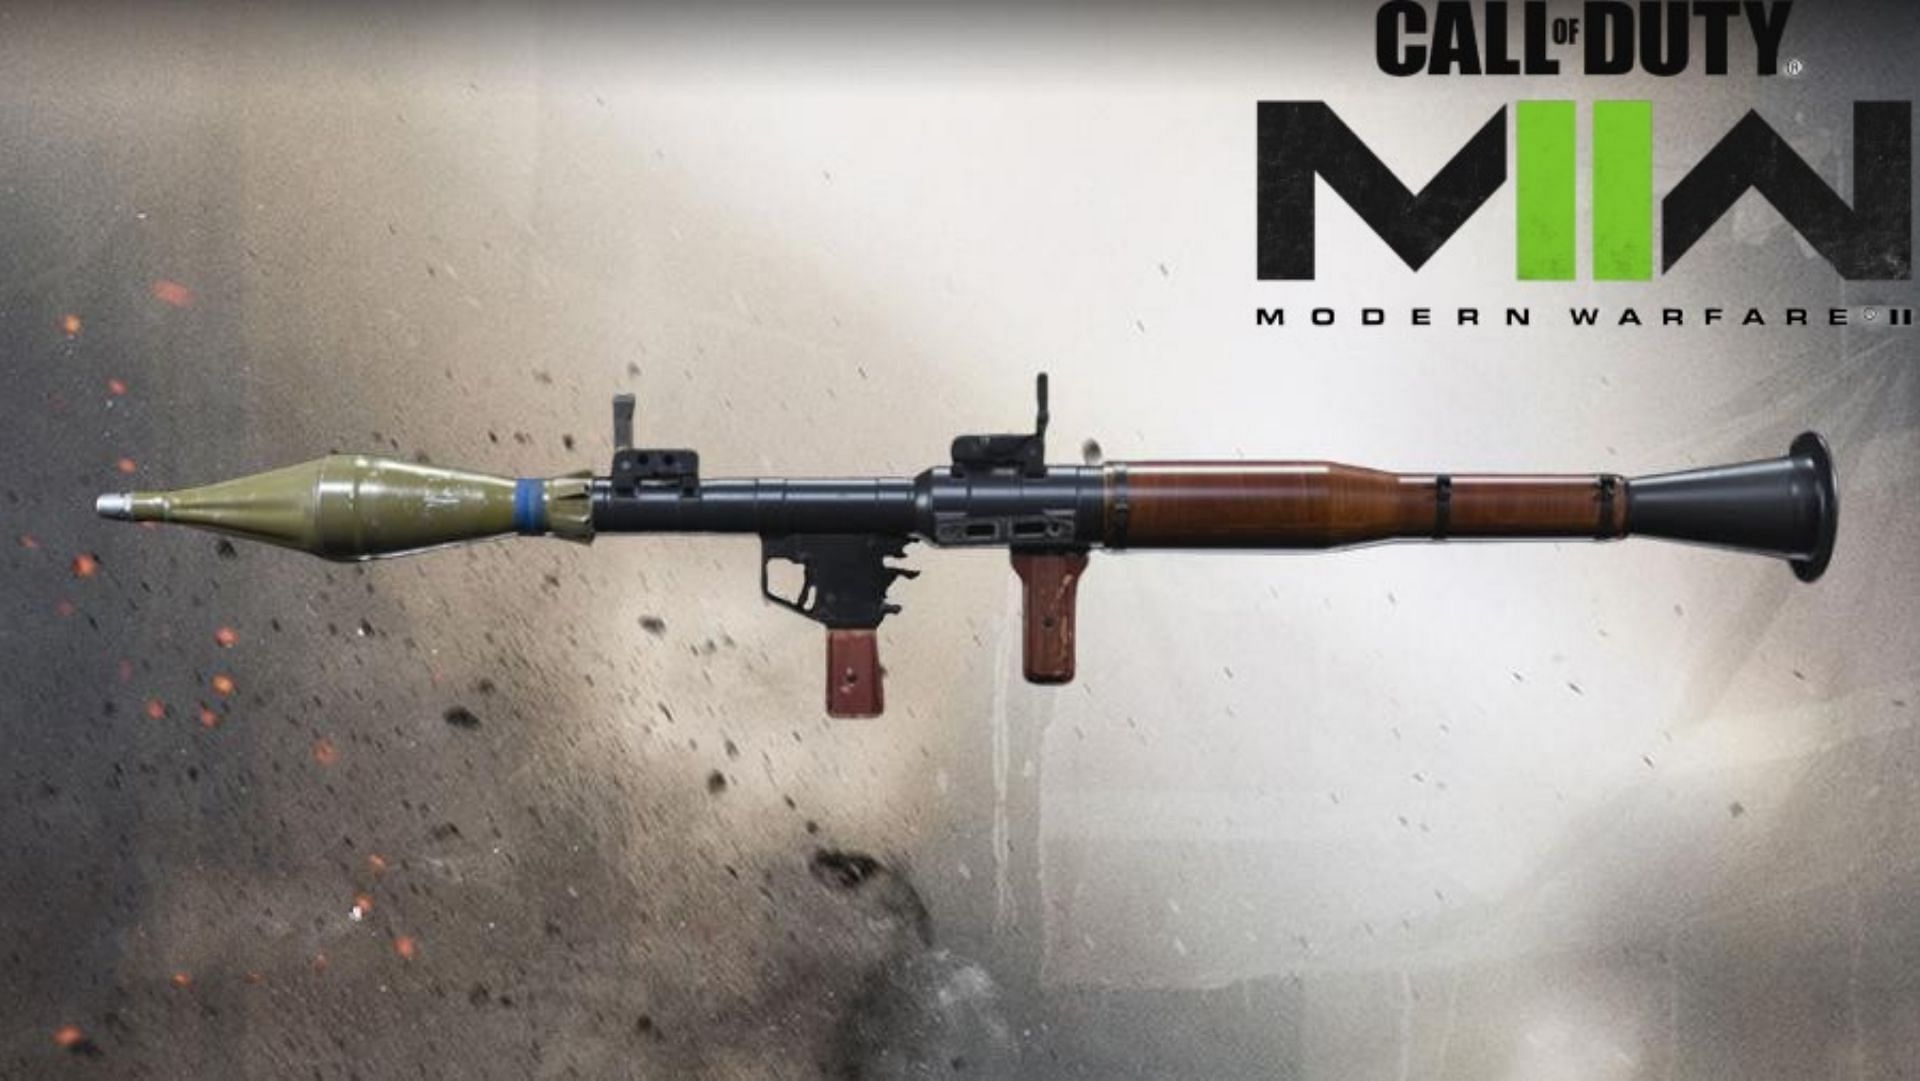 RPG-7 launcher in MW2 (Image via Activision)